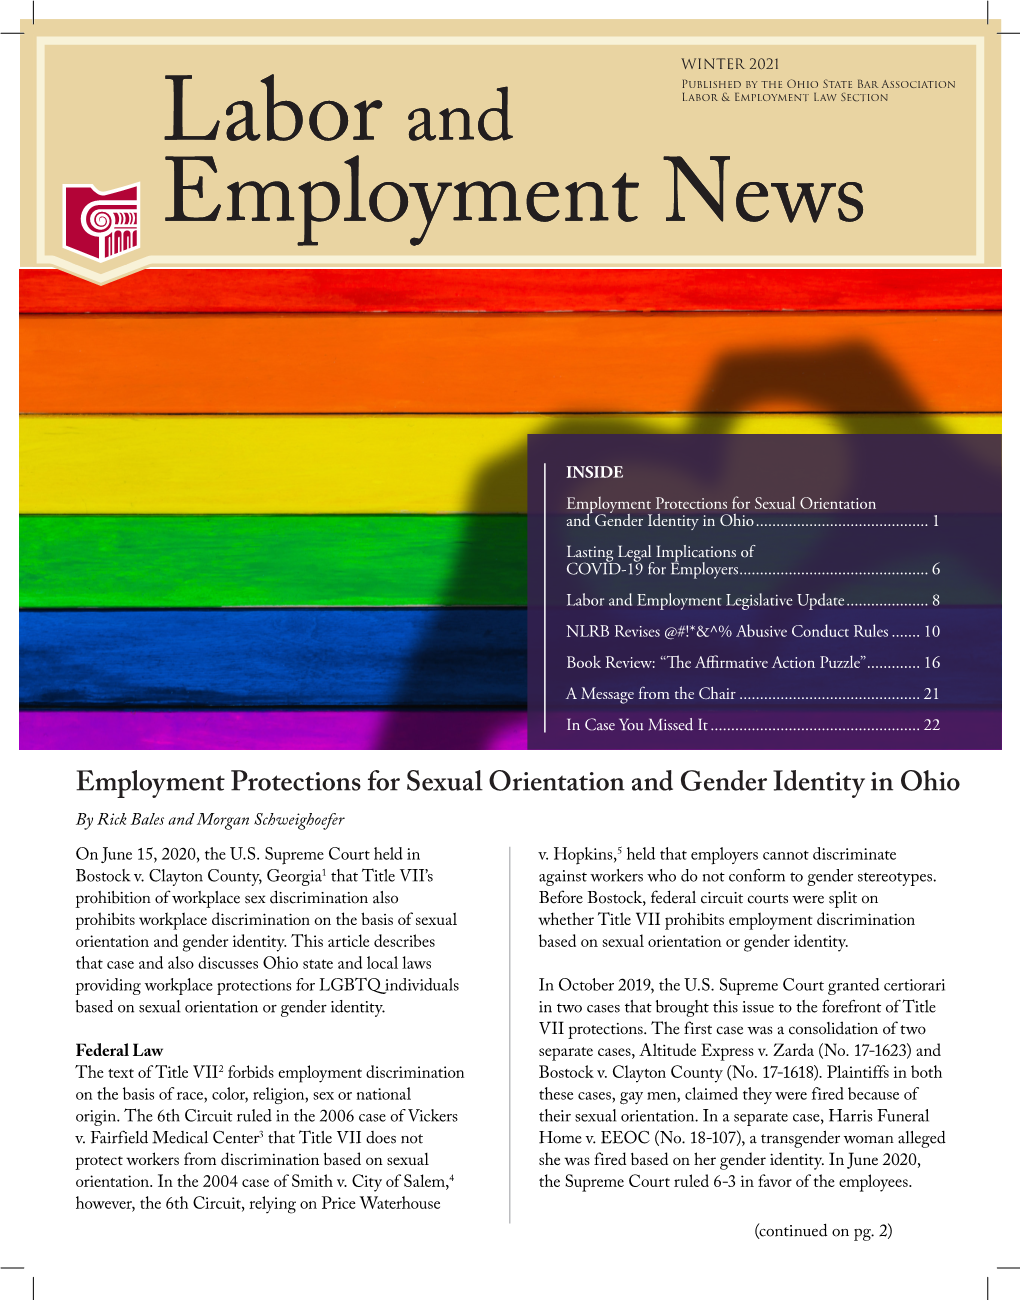 Labor and Employment News